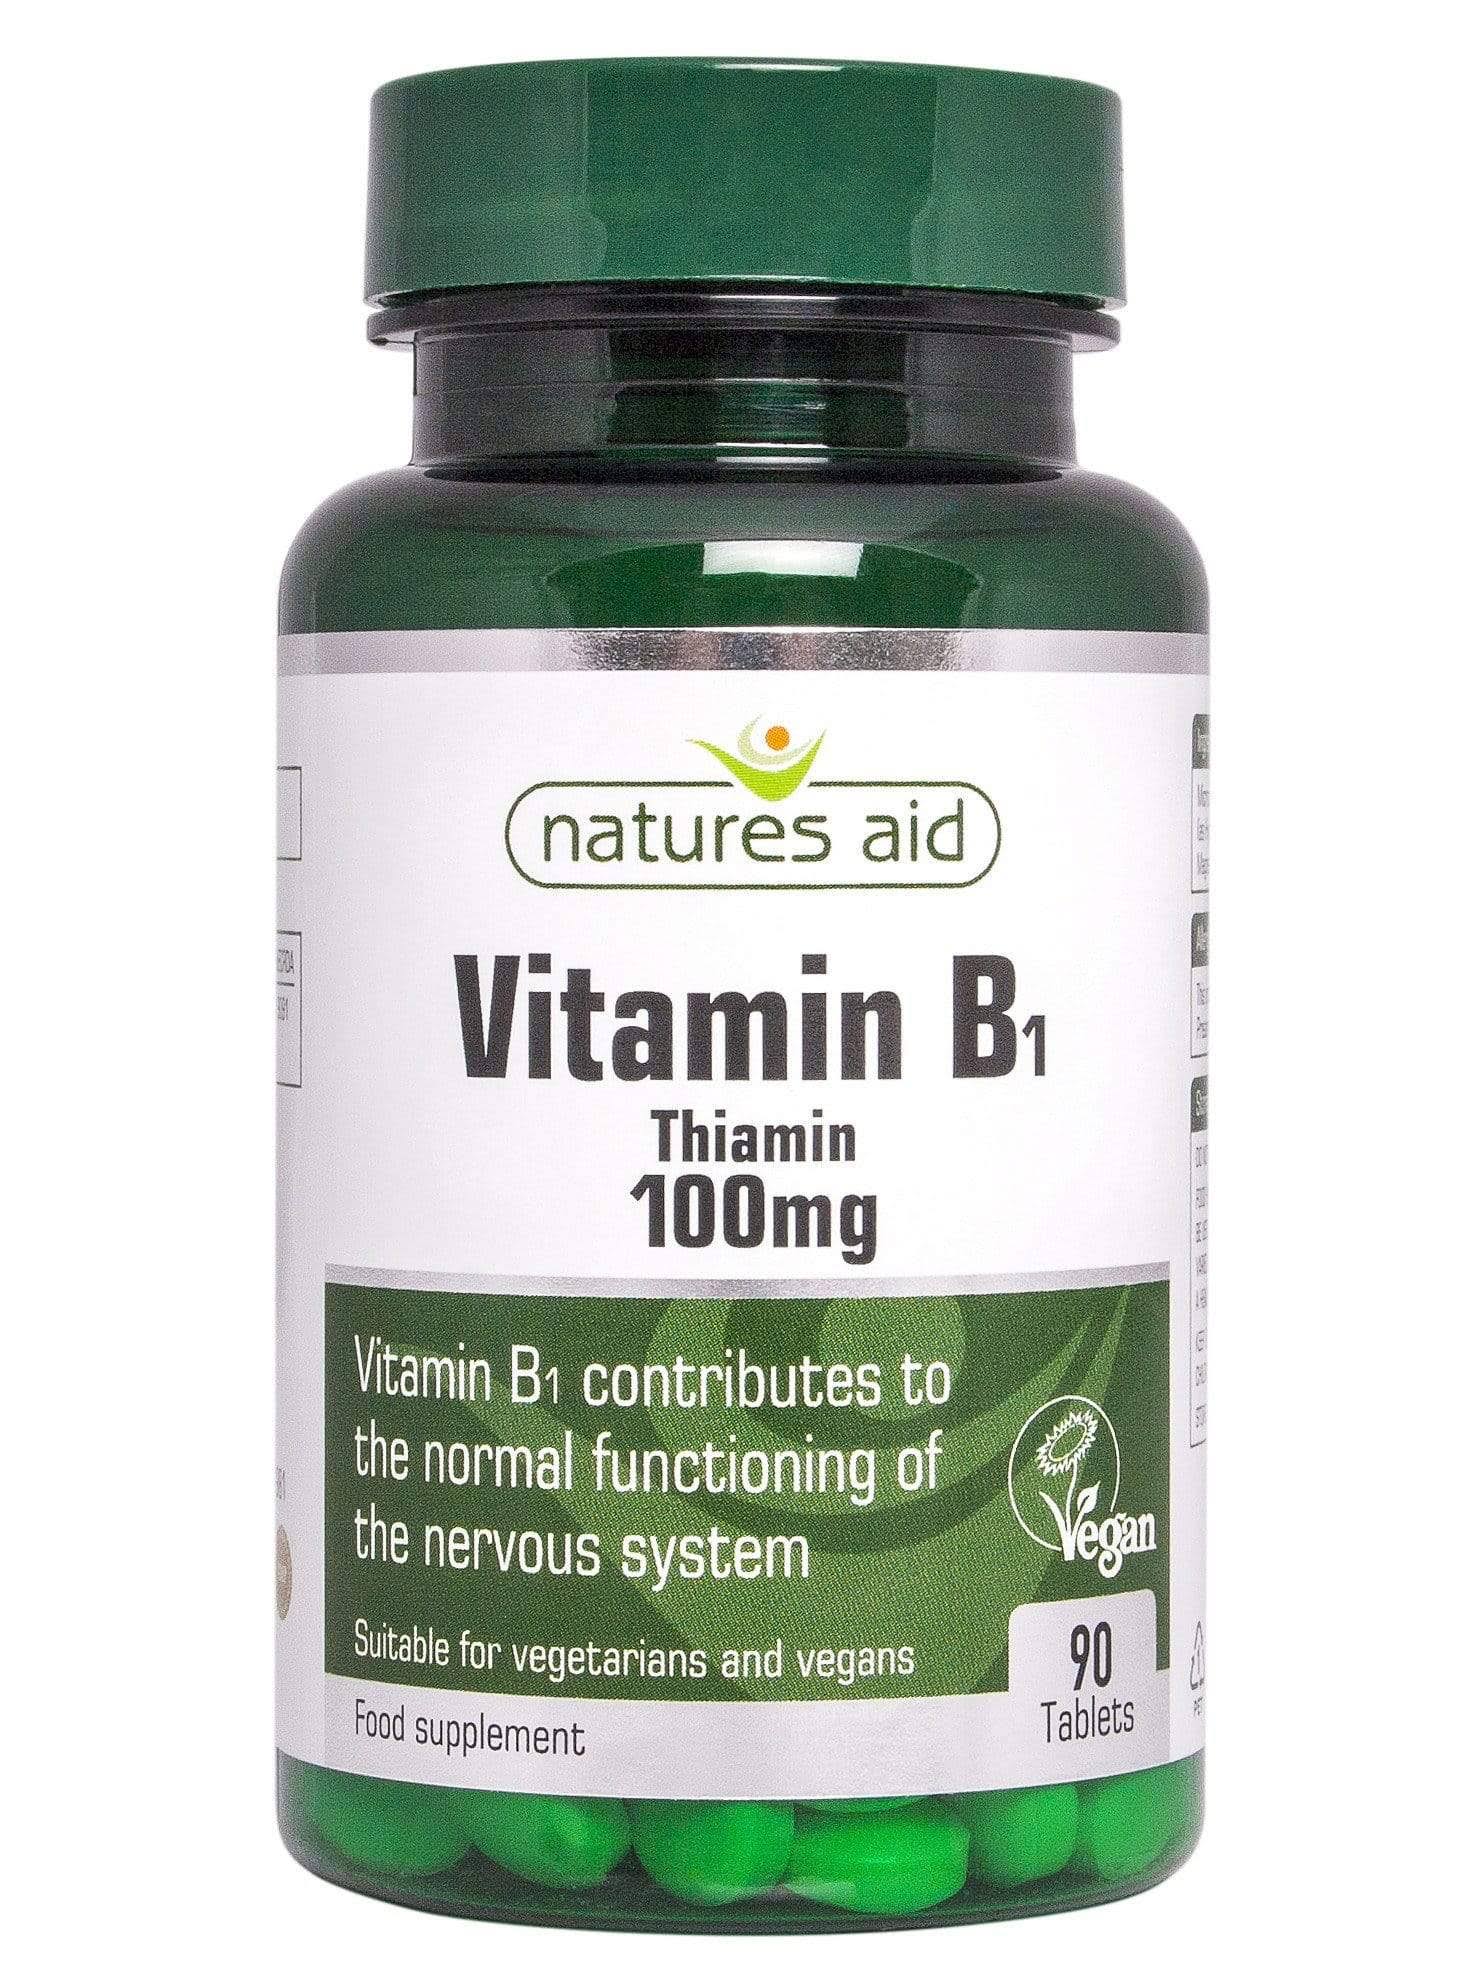 Natures Aid Vitamin B1 Food Supplement - 90 Tablets